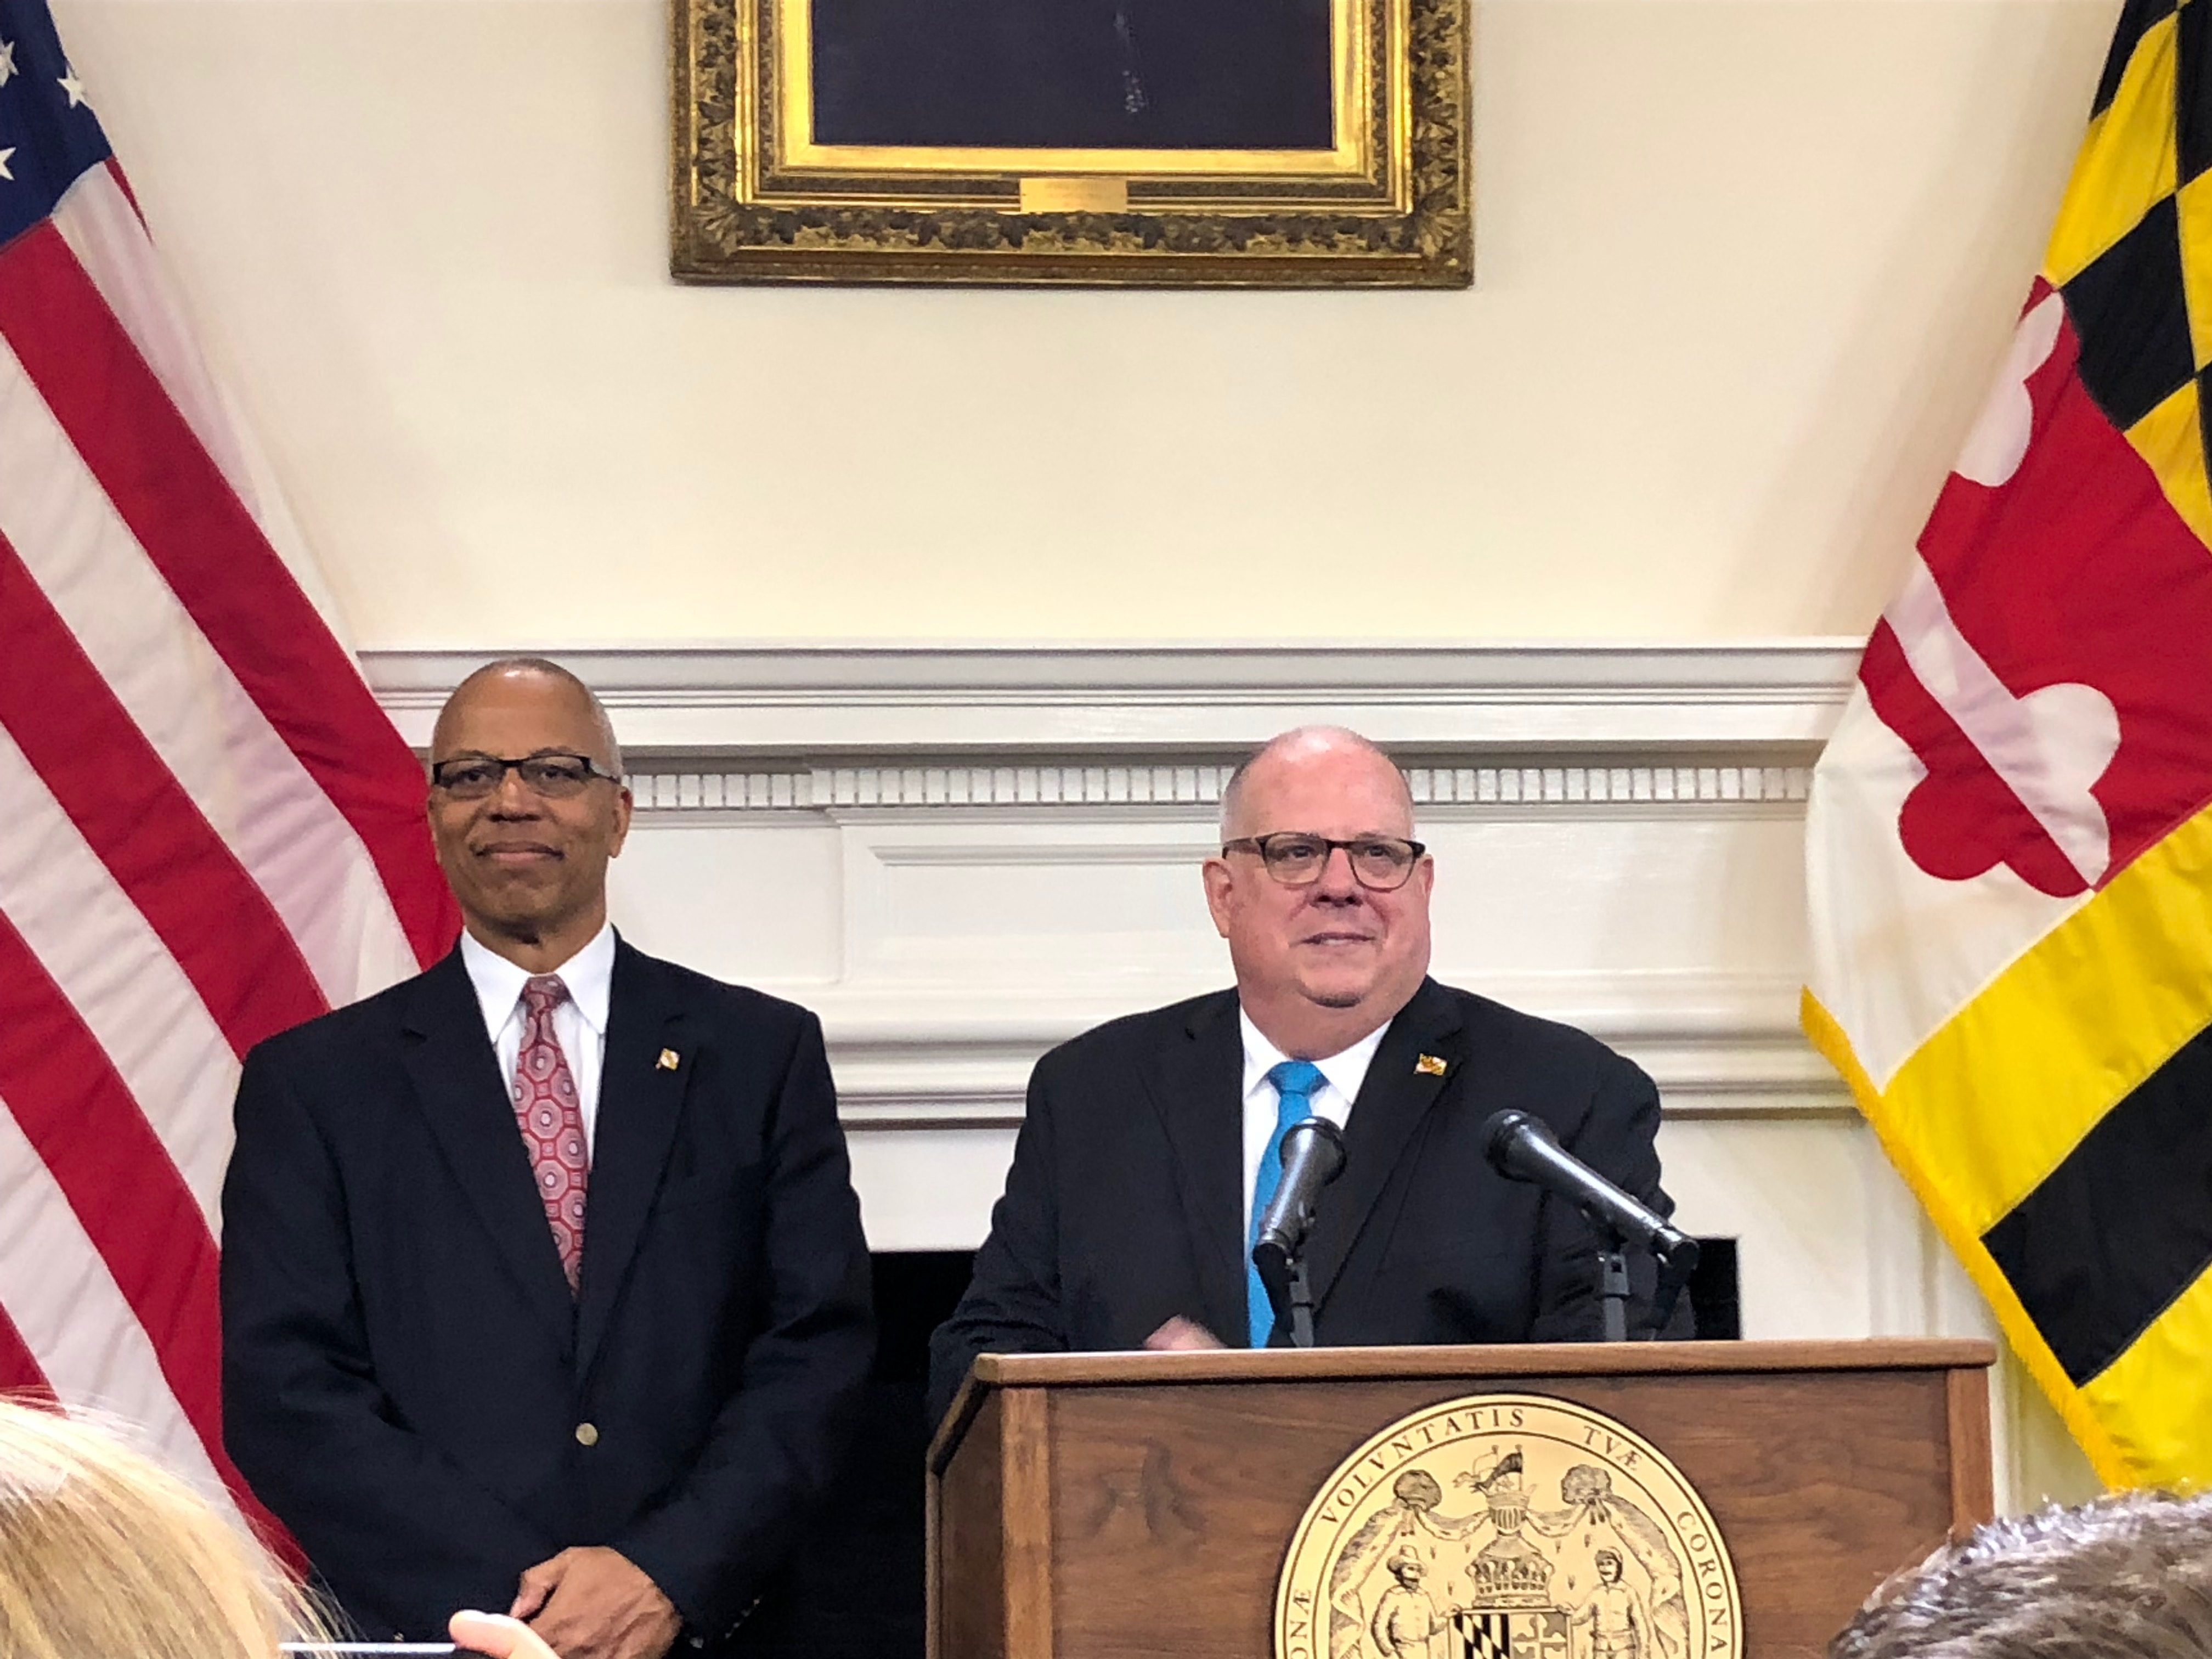 Gov. Larry Hogan — a day after winning re-election in the Maryland governor’s race — held a celebratory press conference in the Governor’s Reception Room of the Maryland State House on Wednesday, Nov. 7, 2018, in Annapolis, Maryland. (Photo by Brooks DuBose/Capital News Service)